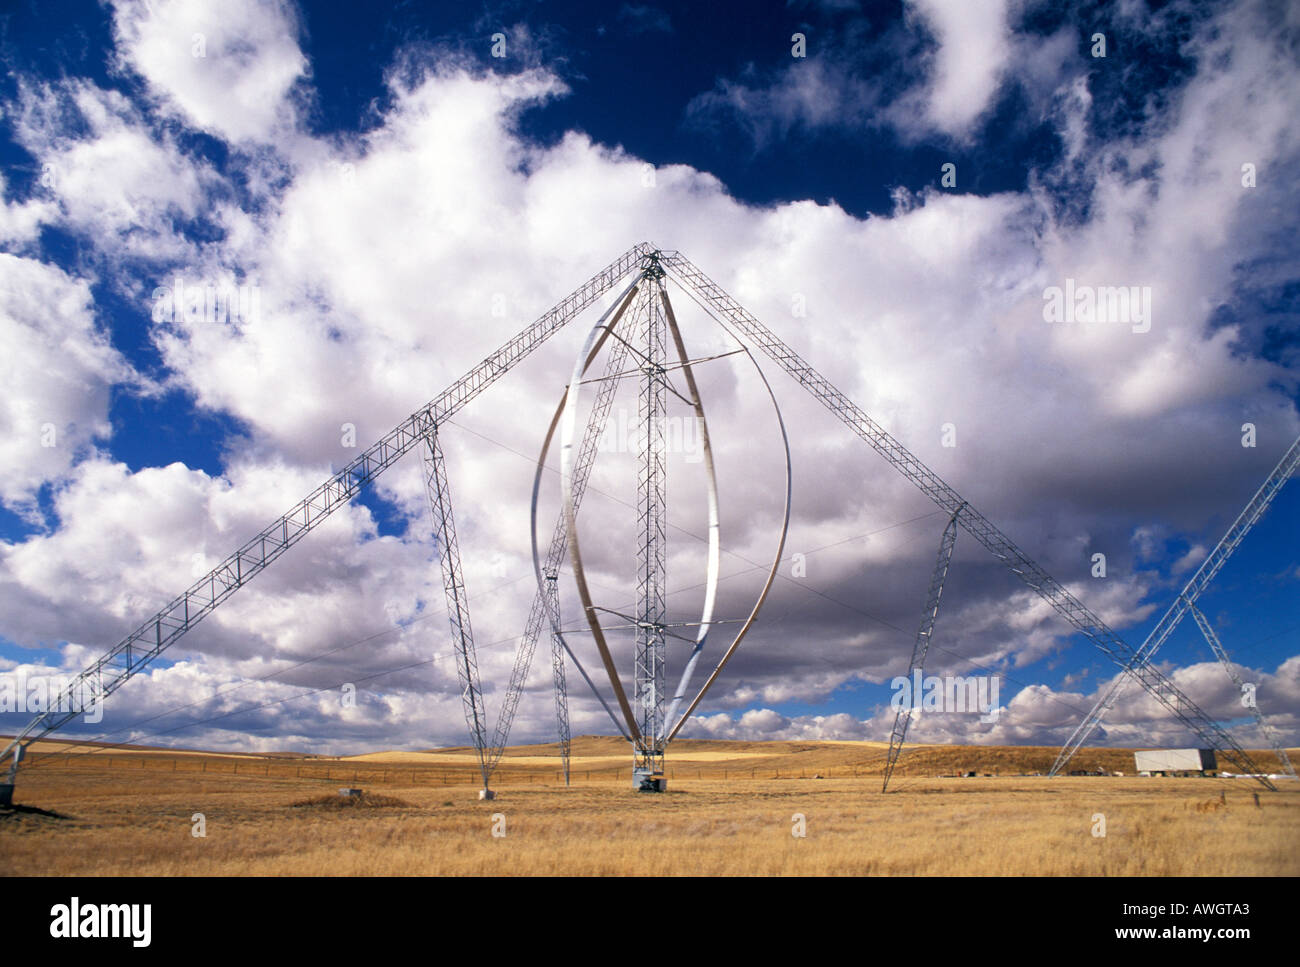 Experimental windmills for generating electricity in Southern Alberta Canada Stock Photo